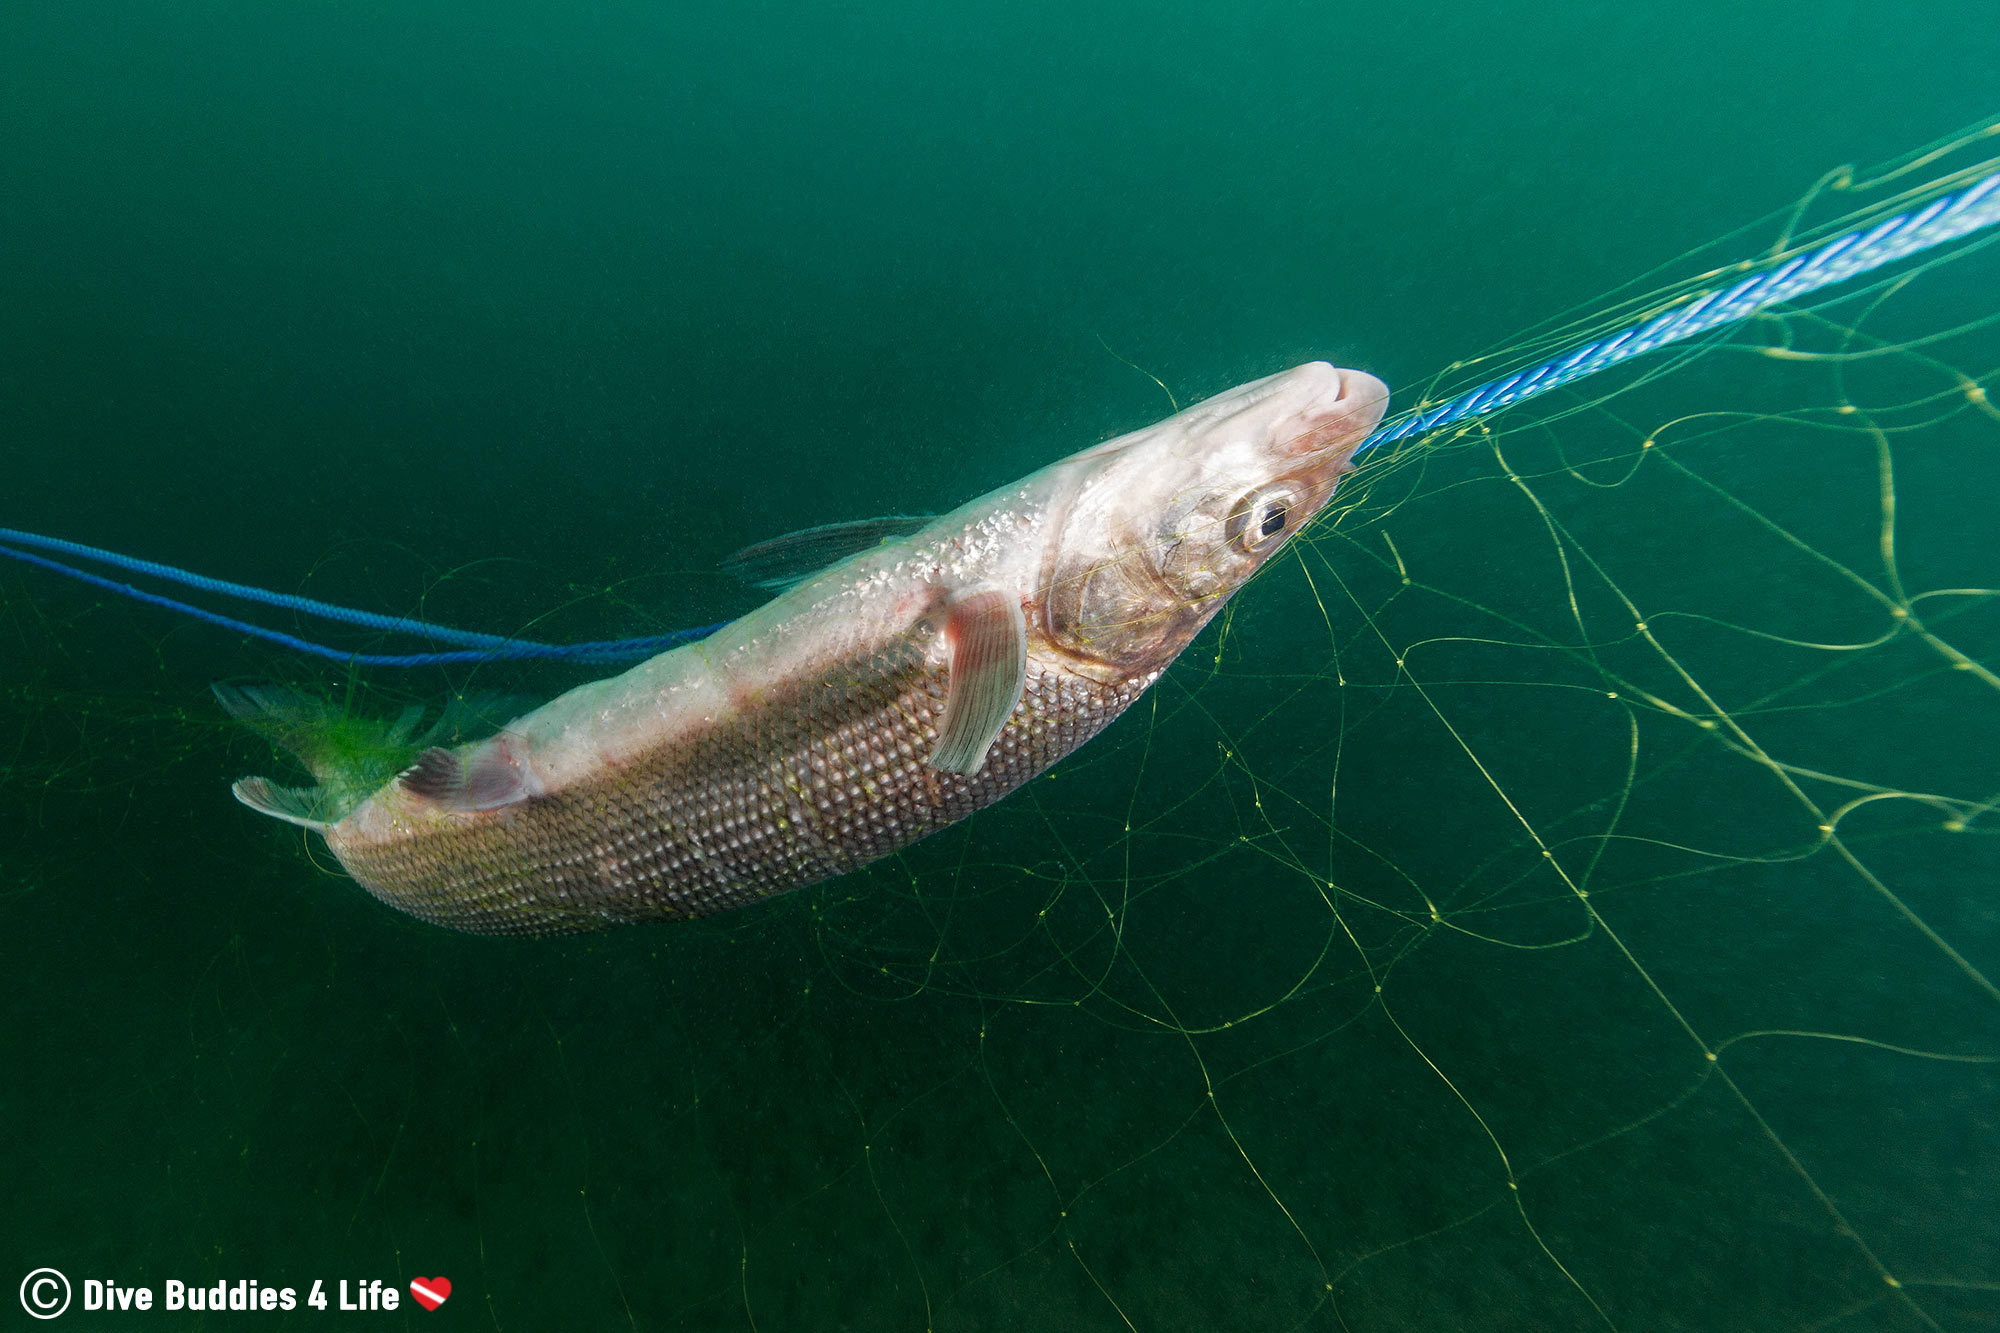 A Whitefish Caught In A Fishing Net On Lake Superior, Thunder Bay, Ontario, Scuba Diving Canada